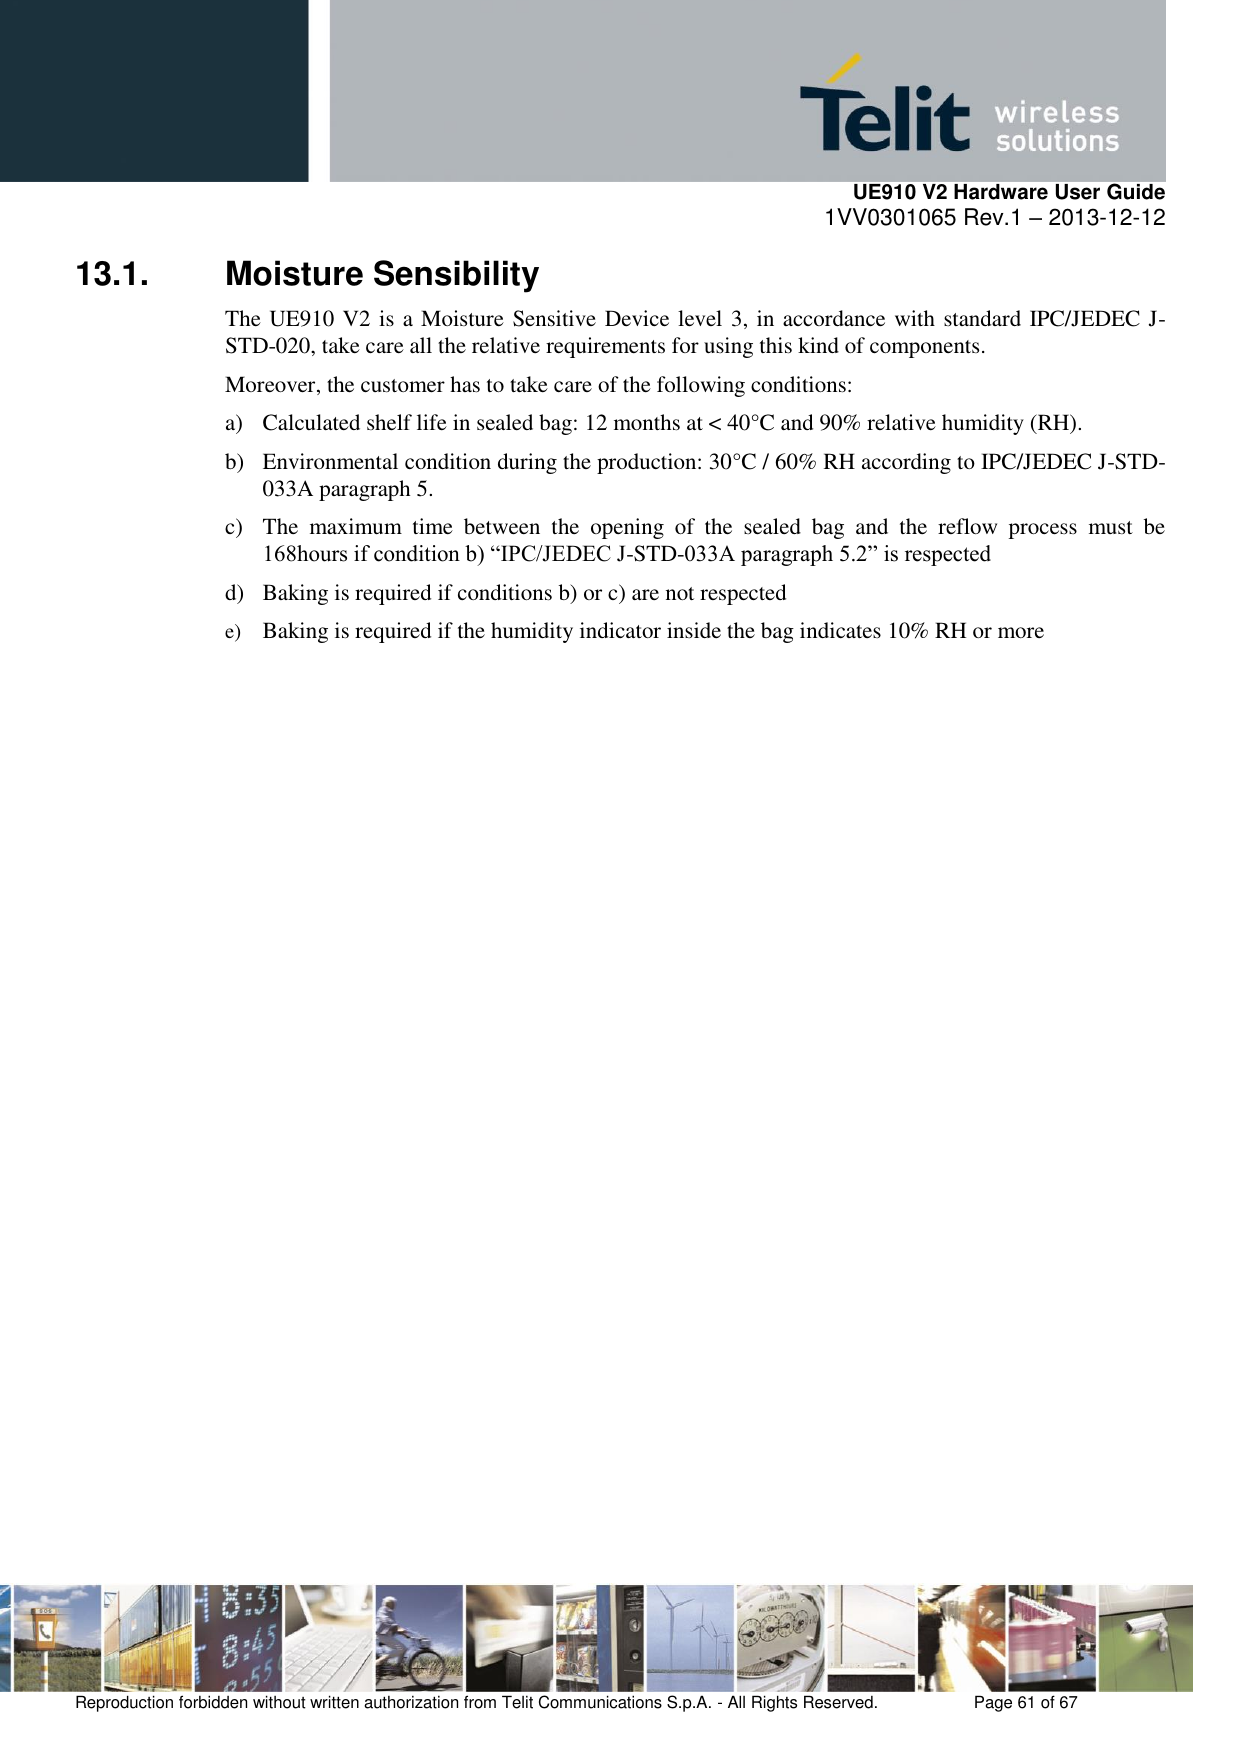     UE910 V2 Hardware User Guide 1VV0301065 Rev.1 – 2013-12-12  Reproduction forbidden without written authorization from Telit Communications S.p.A. - All Rights Reserved.    Page 61 of 67                                                     13.1.  Moisture Sensibility The UE910 V2 is a Moisture Sensitive Device level 3, in accordance with standard IPC/JEDEC J-STD-020, take care all the relative requirements for using this kind of components. Moreover, the customer has to take care of the following conditions: a) Calculated shelf life in sealed bag: 12 months at &lt; 40°C and 90% relative humidity (RH). b) Environmental condition during the production: 30°C / 60% RH according to IPC/JEDEC J-STD-033A paragraph 5. c) The  maximum  time  between  the  opening  of  the  sealed  bag  and  the  reflow  process  must  be 168hours if condition b) “IPC/JEDEC J-STD-033A paragraph 5.2” is respected d) Baking is required if conditions b) or c) are not respected e) Baking is required if the humidity indicator inside the bag indicates 10% RH or more  